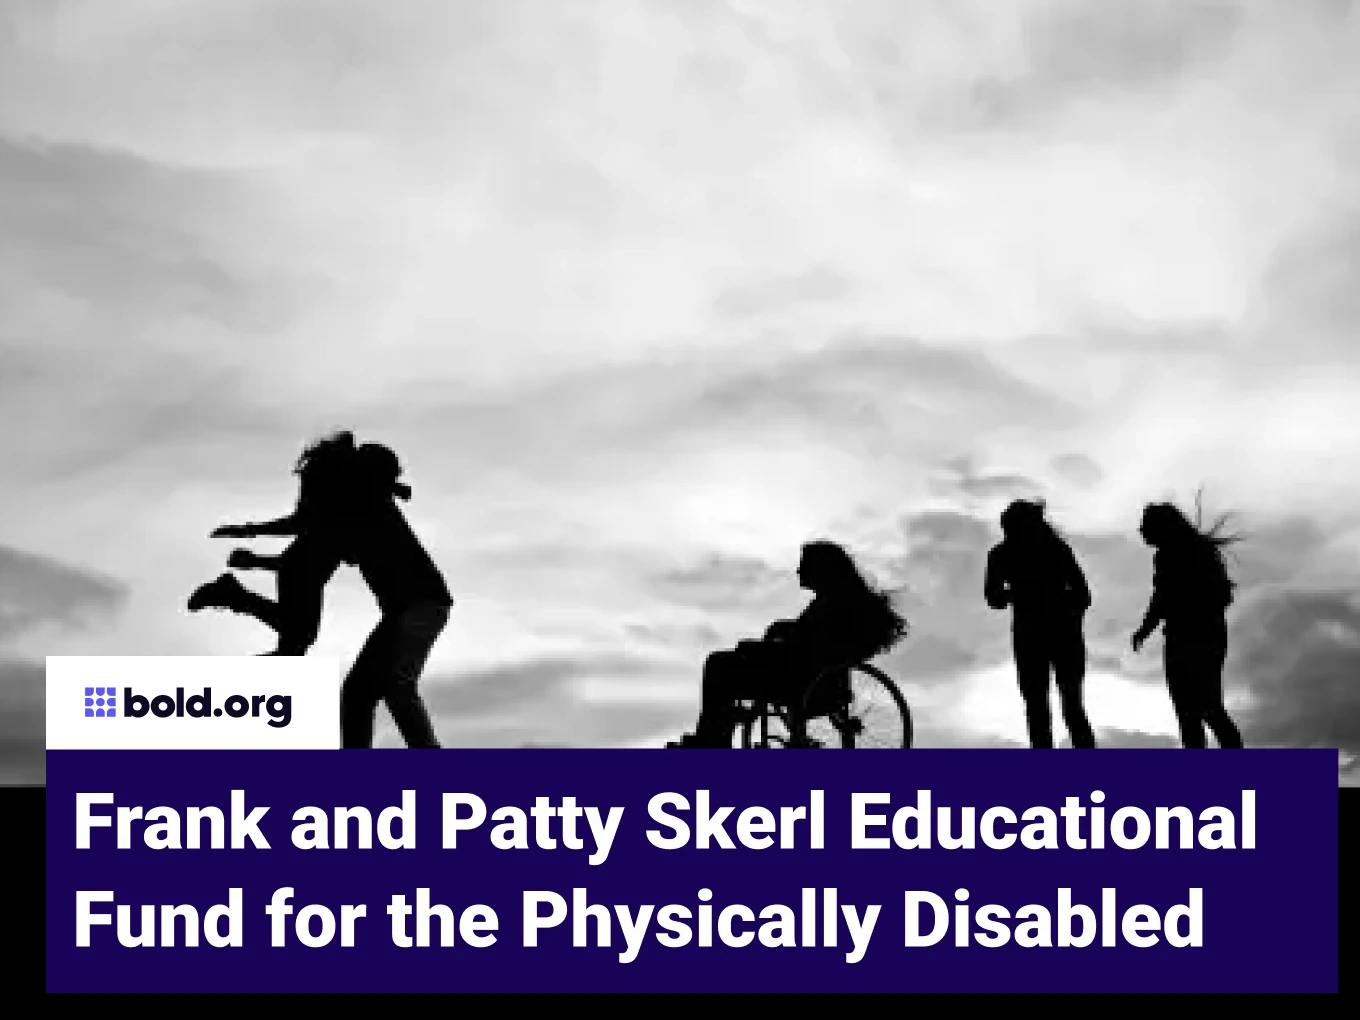 Frank and Patty Skerl Educational Fund for the Physically Disabled